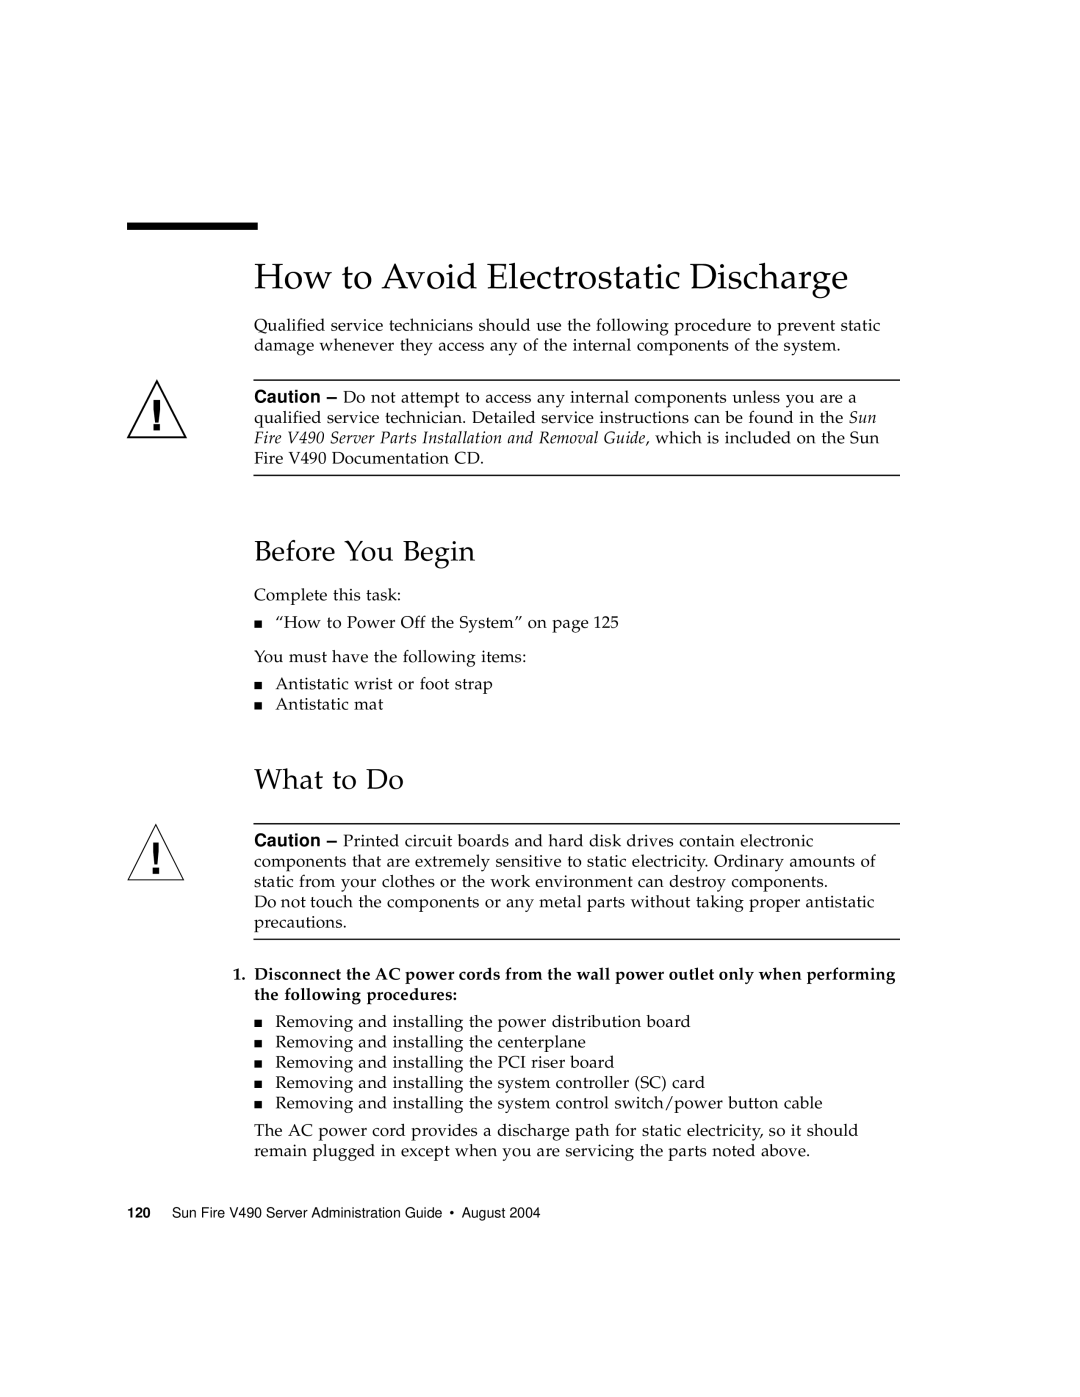 Sun Microsystems V490 manual How to Avoid Electrostatic Discharge, Before You Begin 